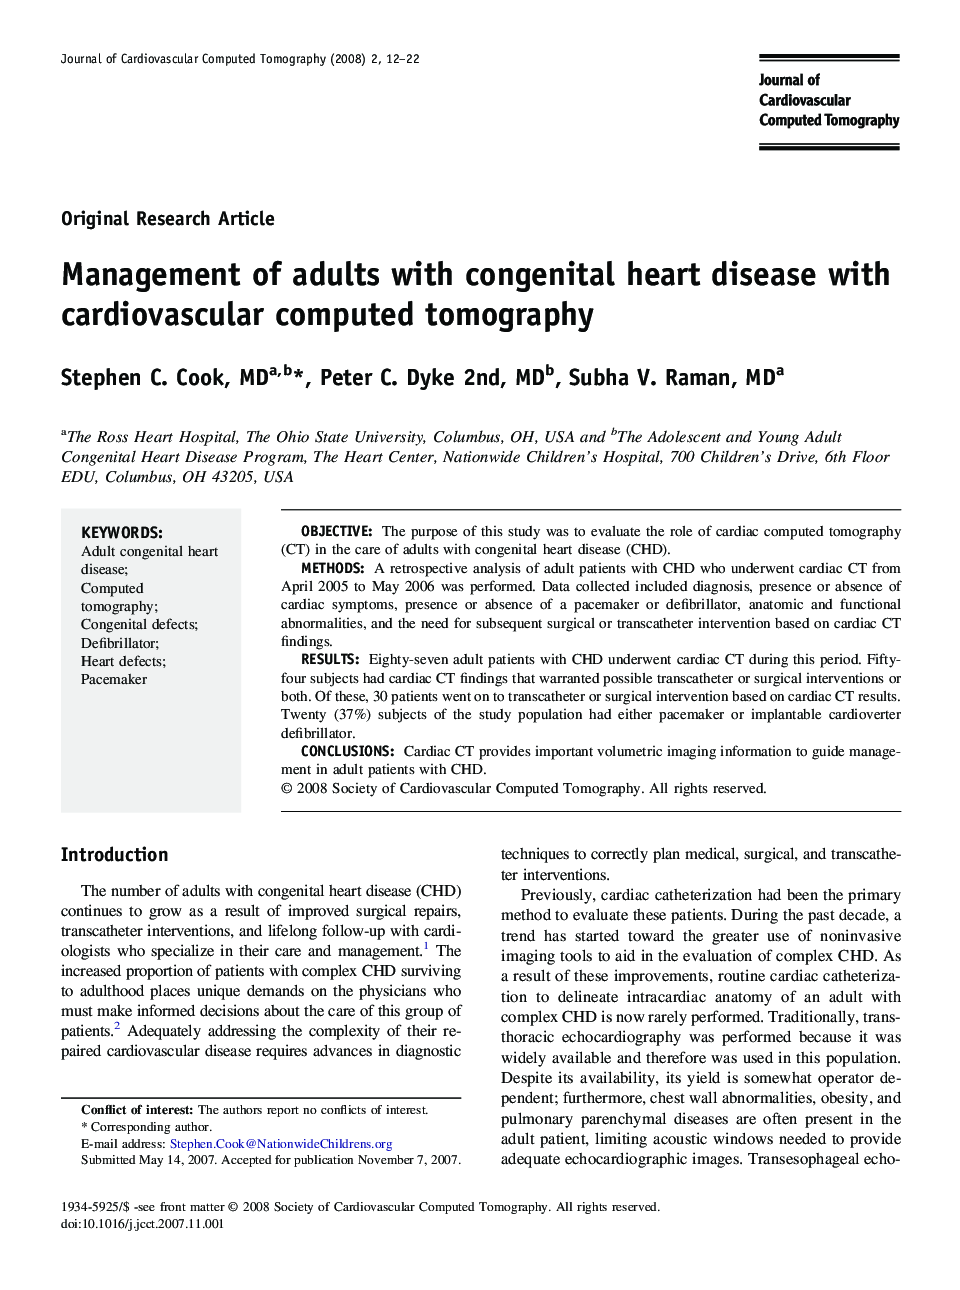 Management of adults with congenital heart disease with cardiovascular computed tomography 